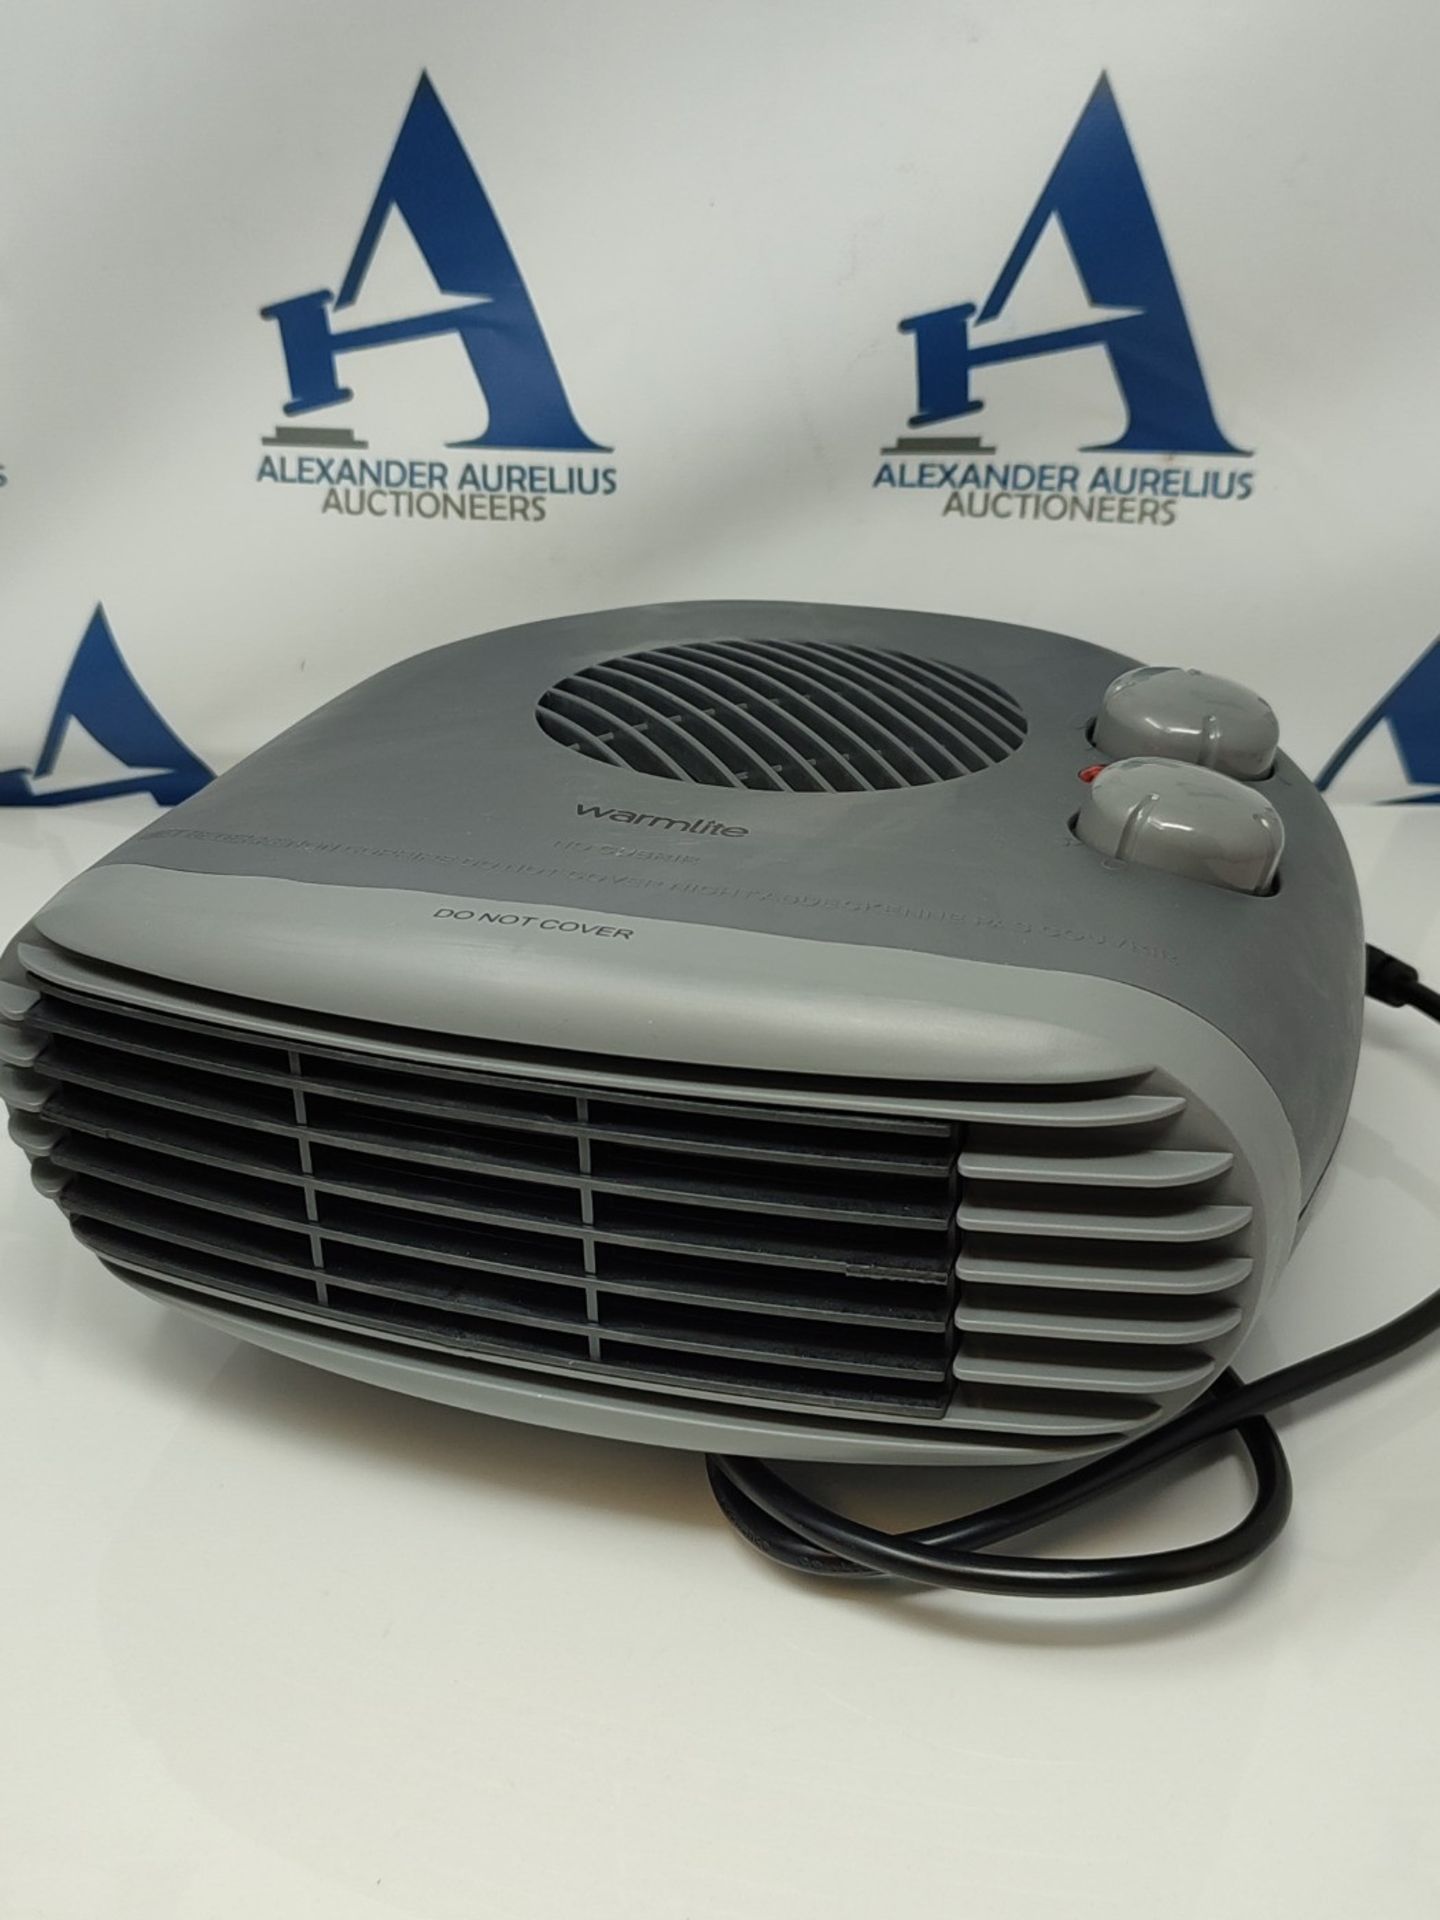 Warmlite WL44004DT 2000W Portable Flat Fan Heater with 2 Heat Settings and Overheat Pr - Image 2 of 2